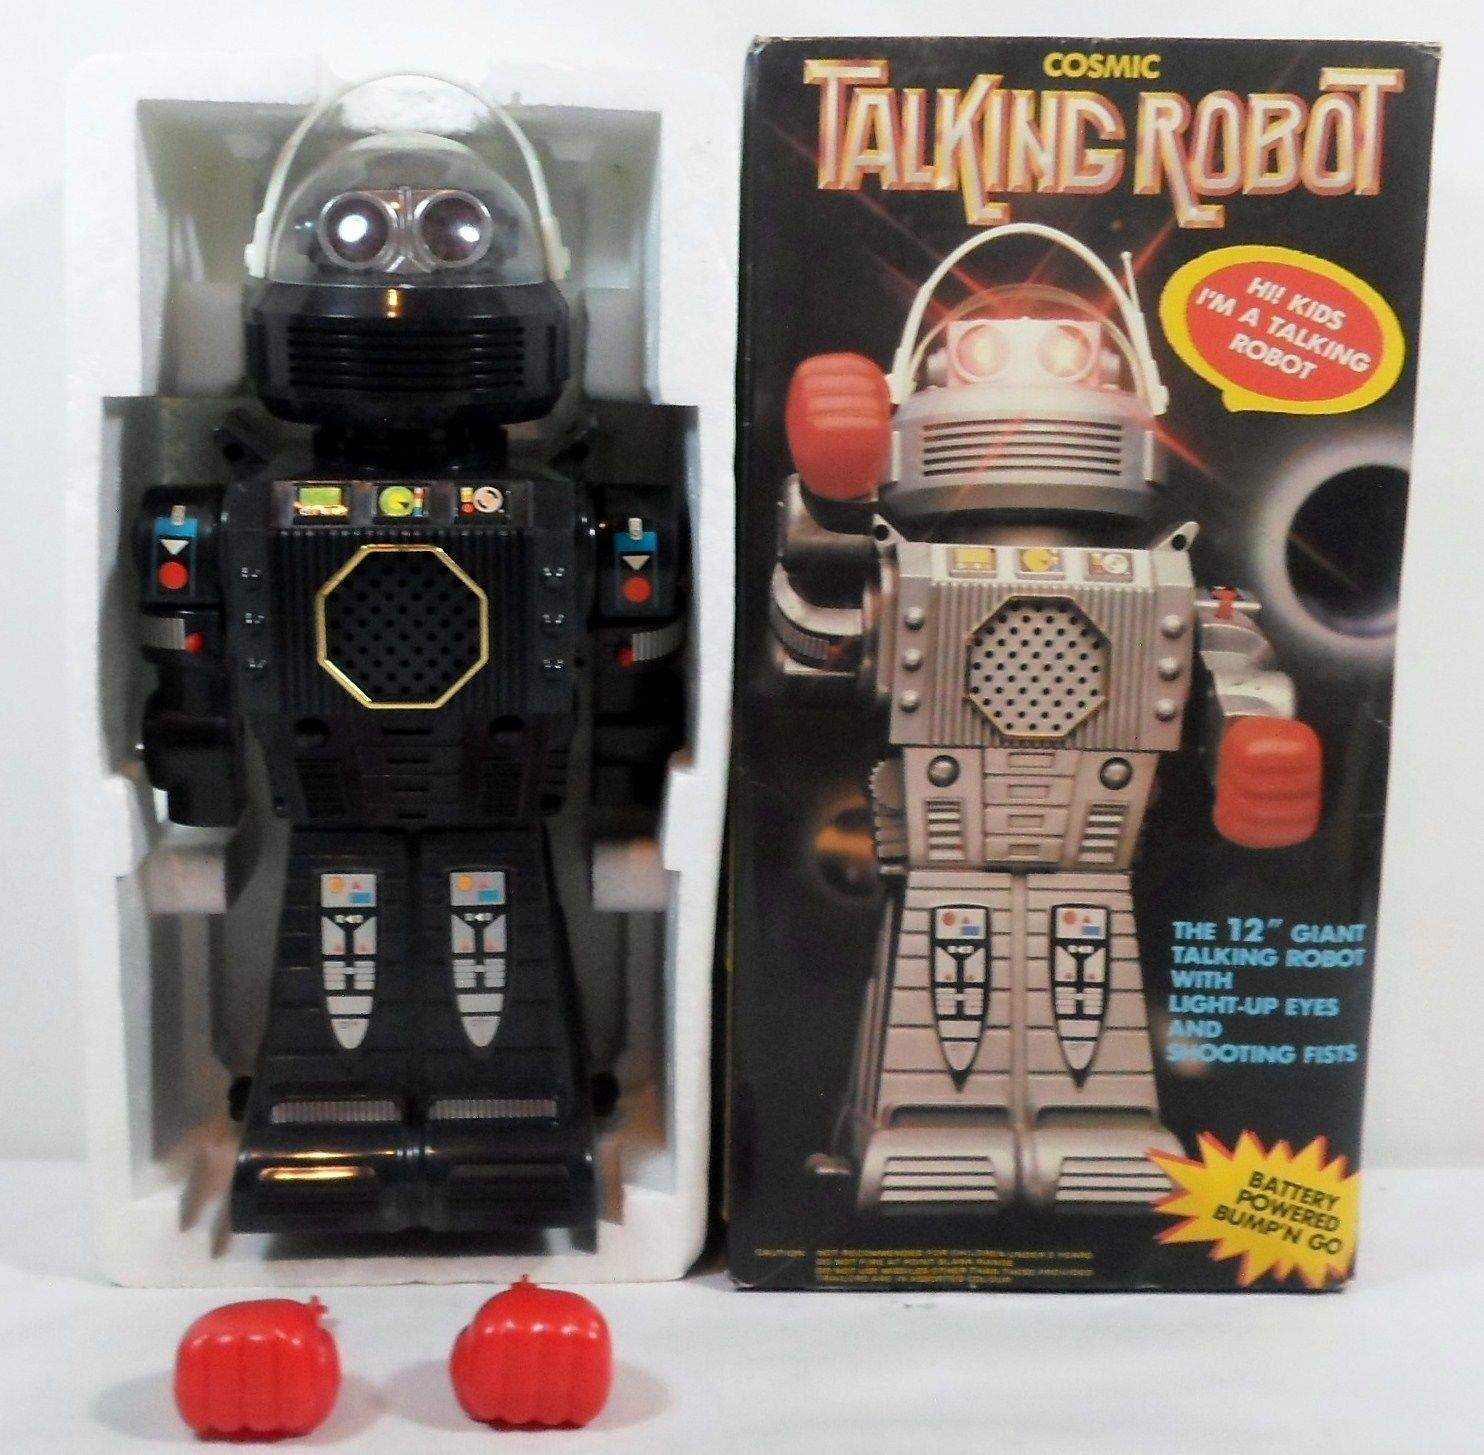 Cosmic Talking Robot, # 8838 by Kamco - The Old Robots Web ...